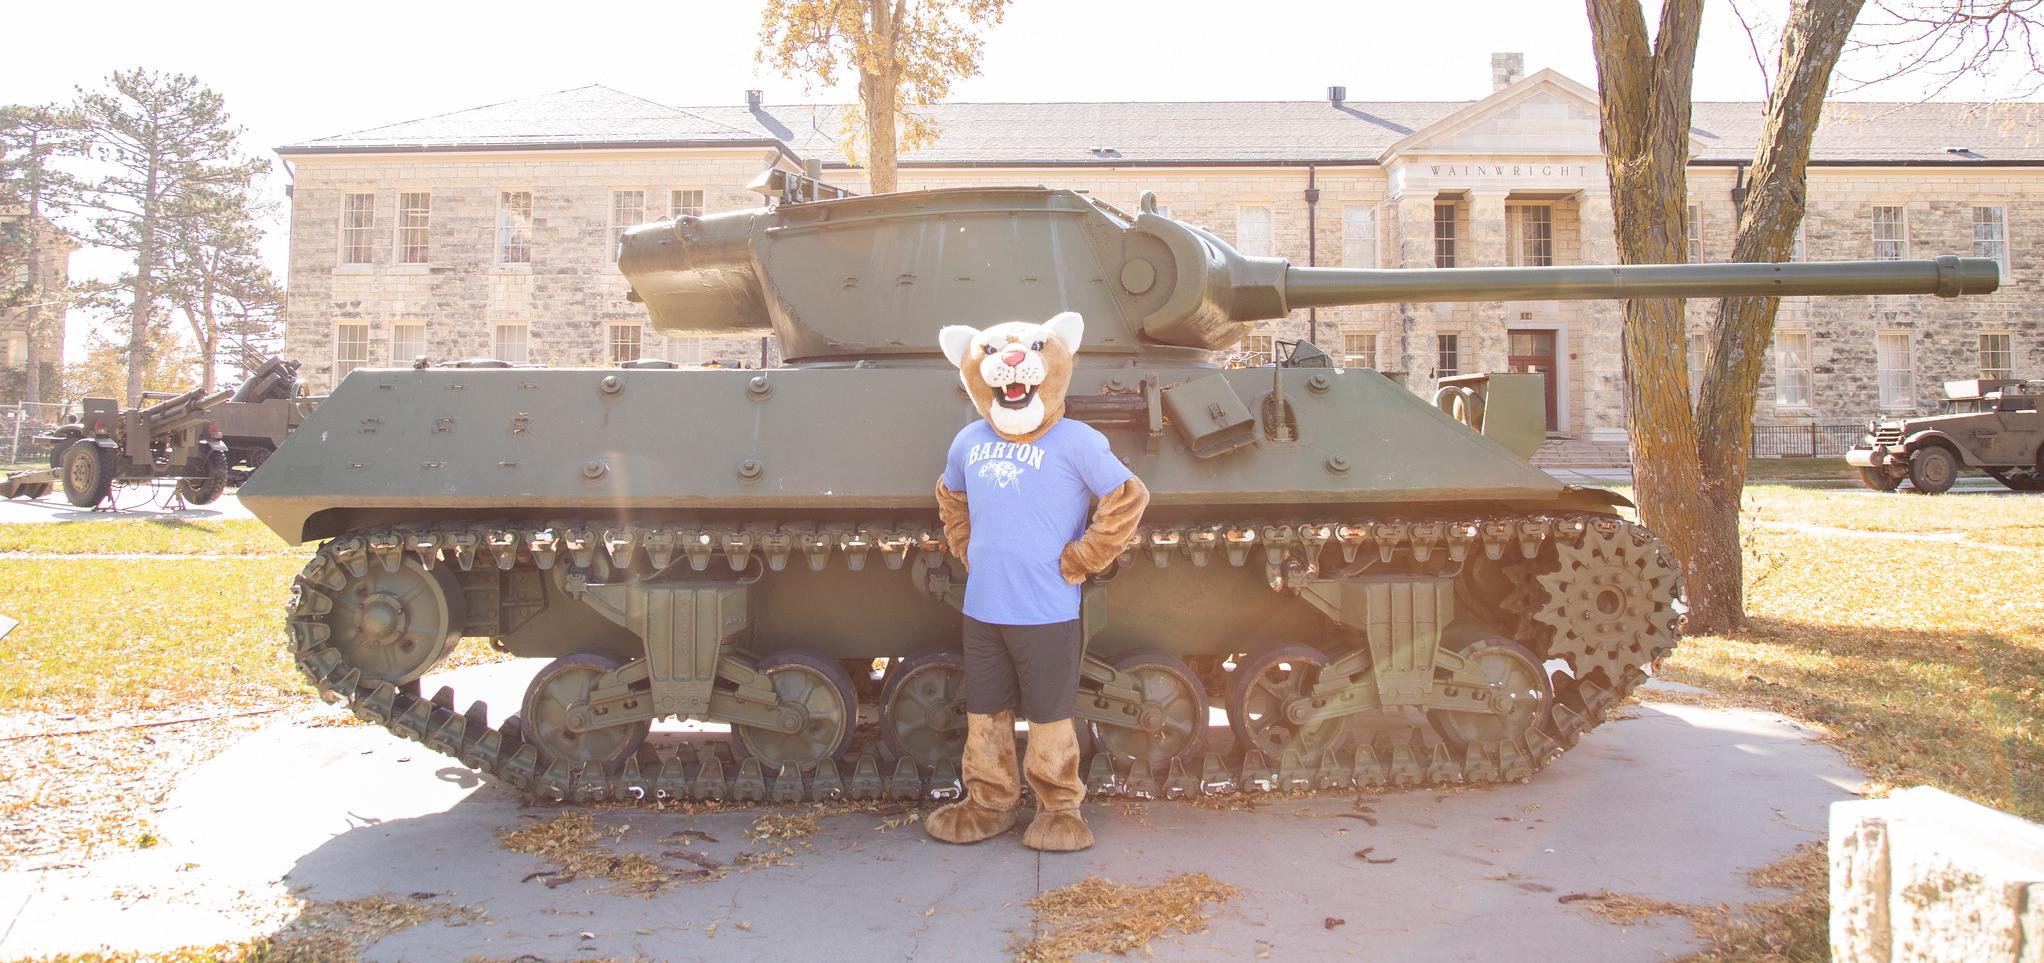 Bart poses by a tank 